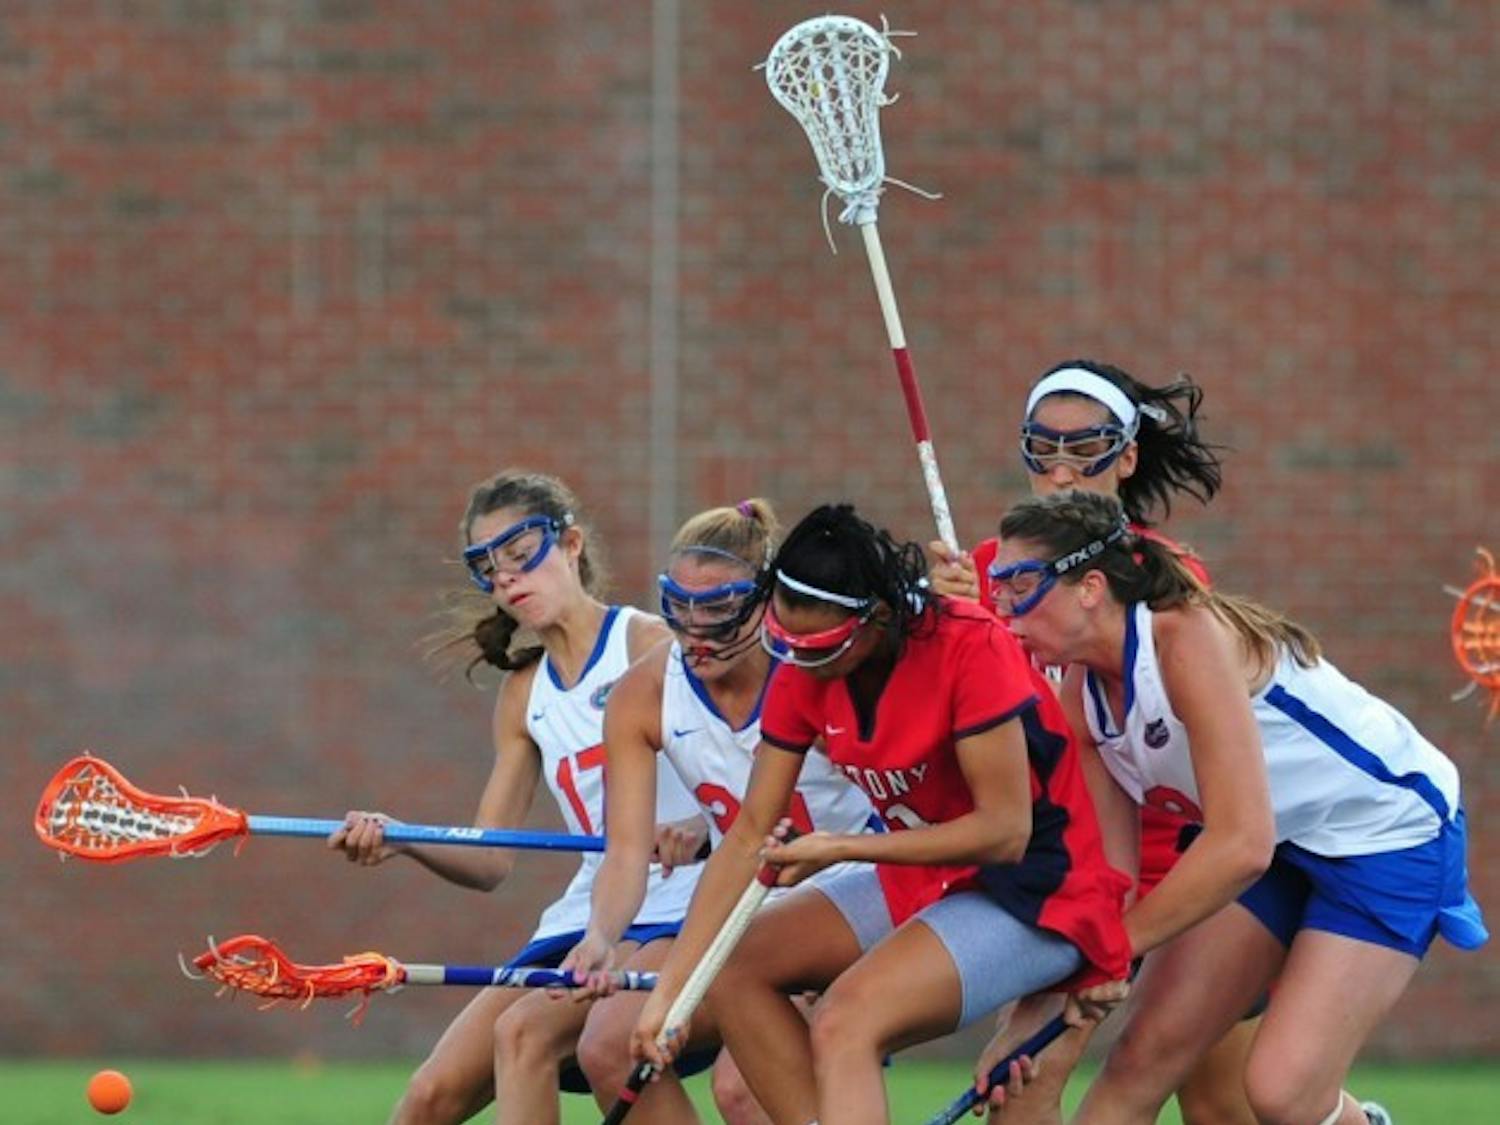 Freshman midfielder Shannon Gilroy (right) competes for a draw control during a match with Stony Brook on March 14. Despite suffering a torn ACL last June, Gilroy has scored 17 goals and leads UF in draw controls.